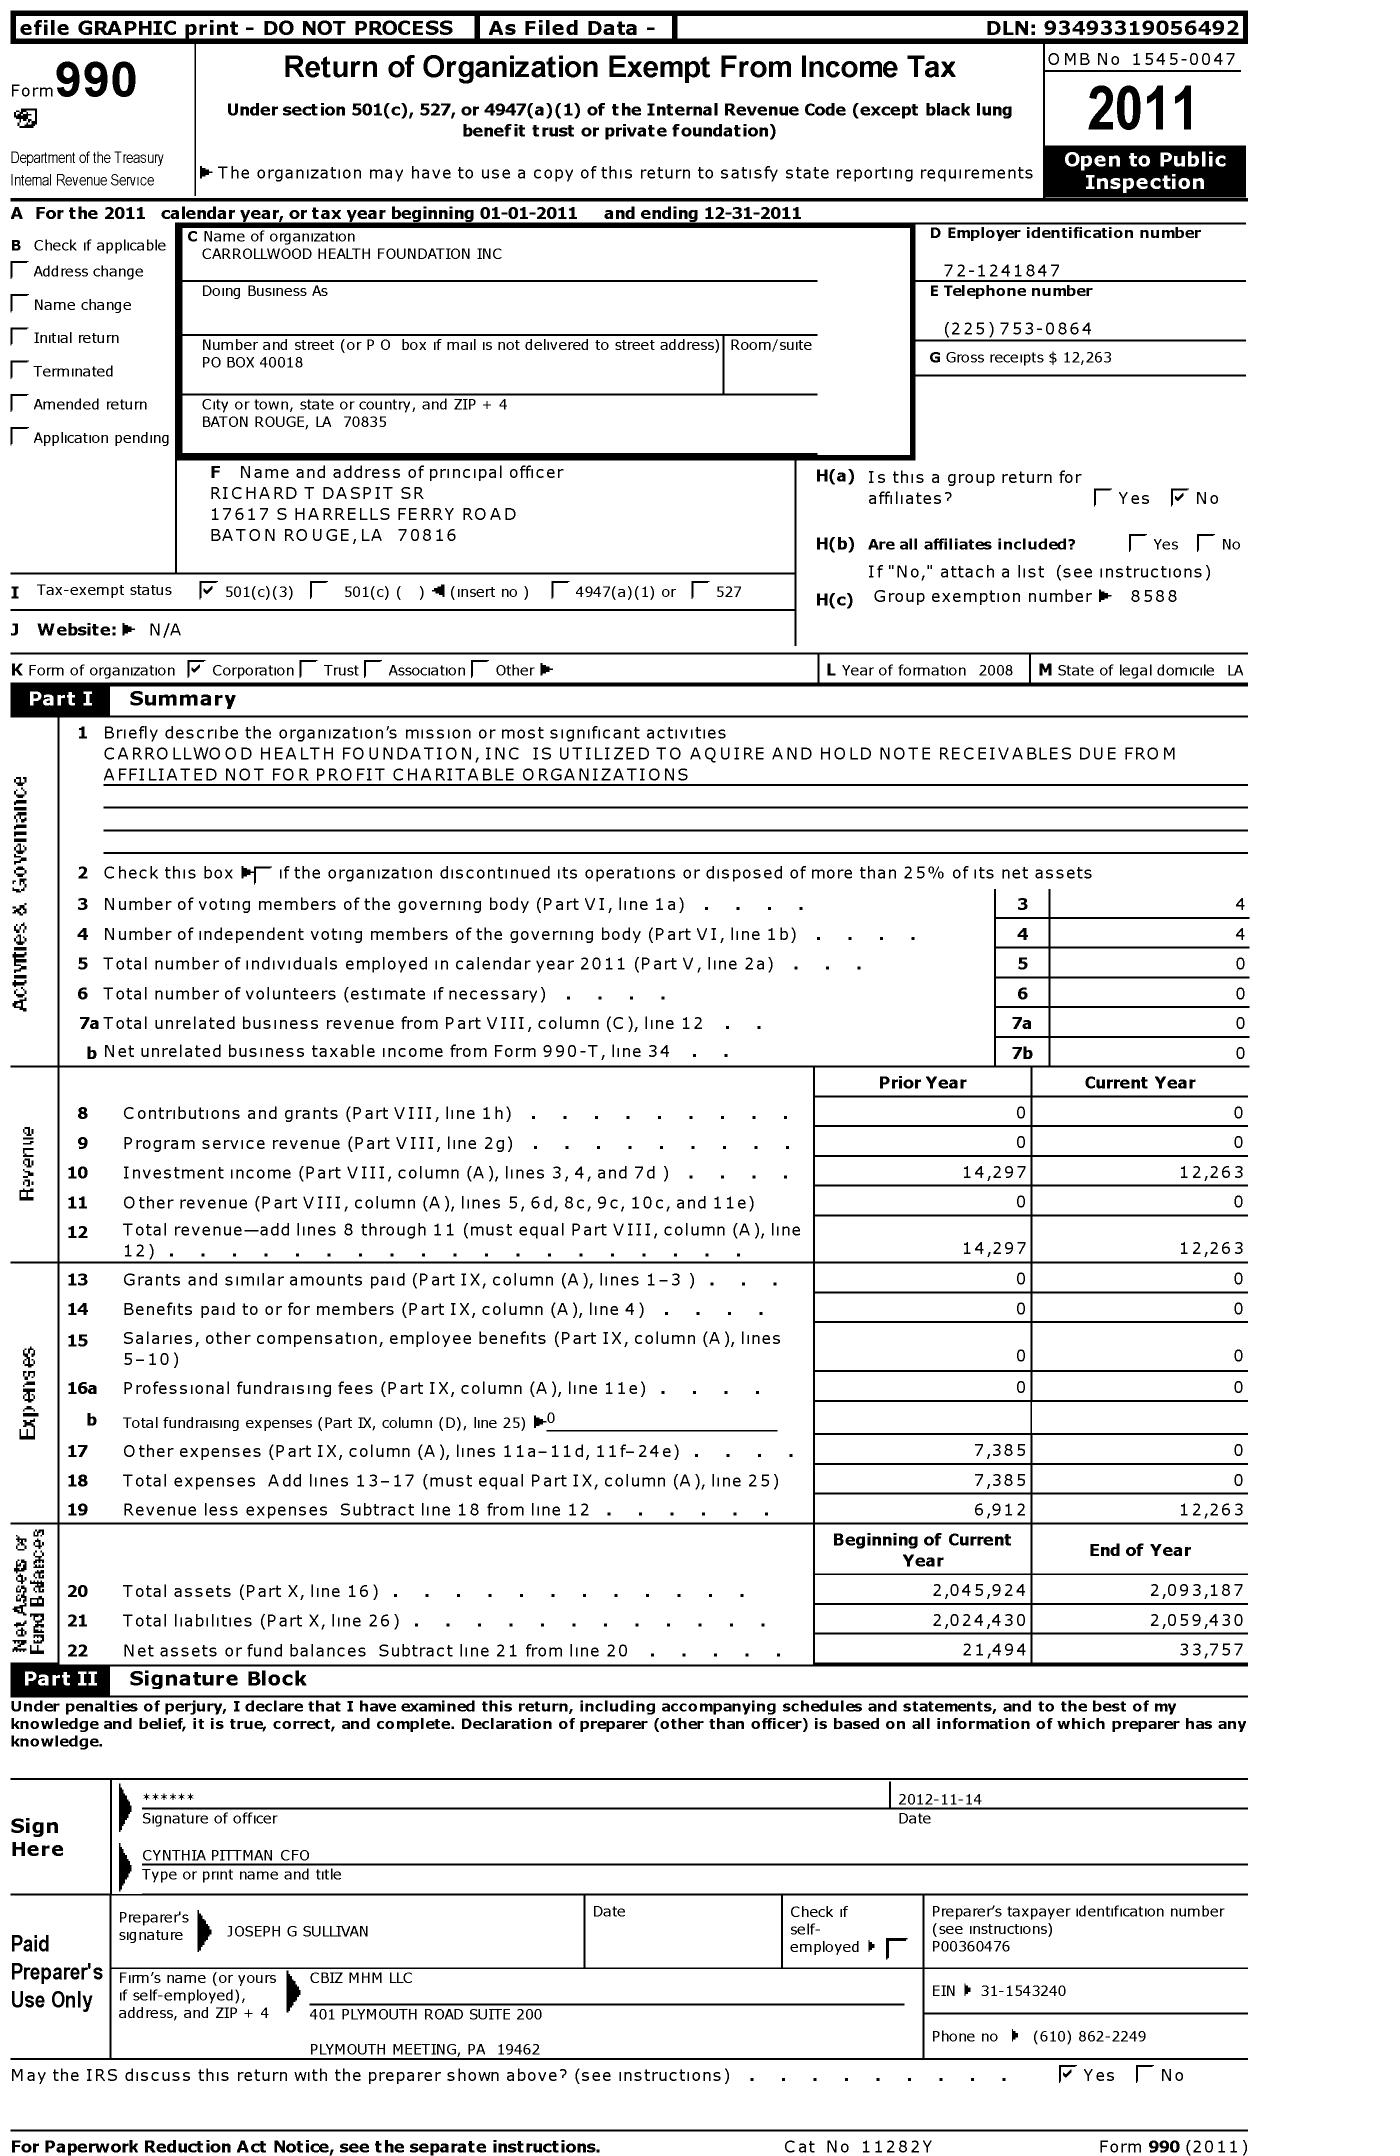 Image of first page of 2011 Form 990 for Foundation Health Services / Carrollwood Health Foundation Inc